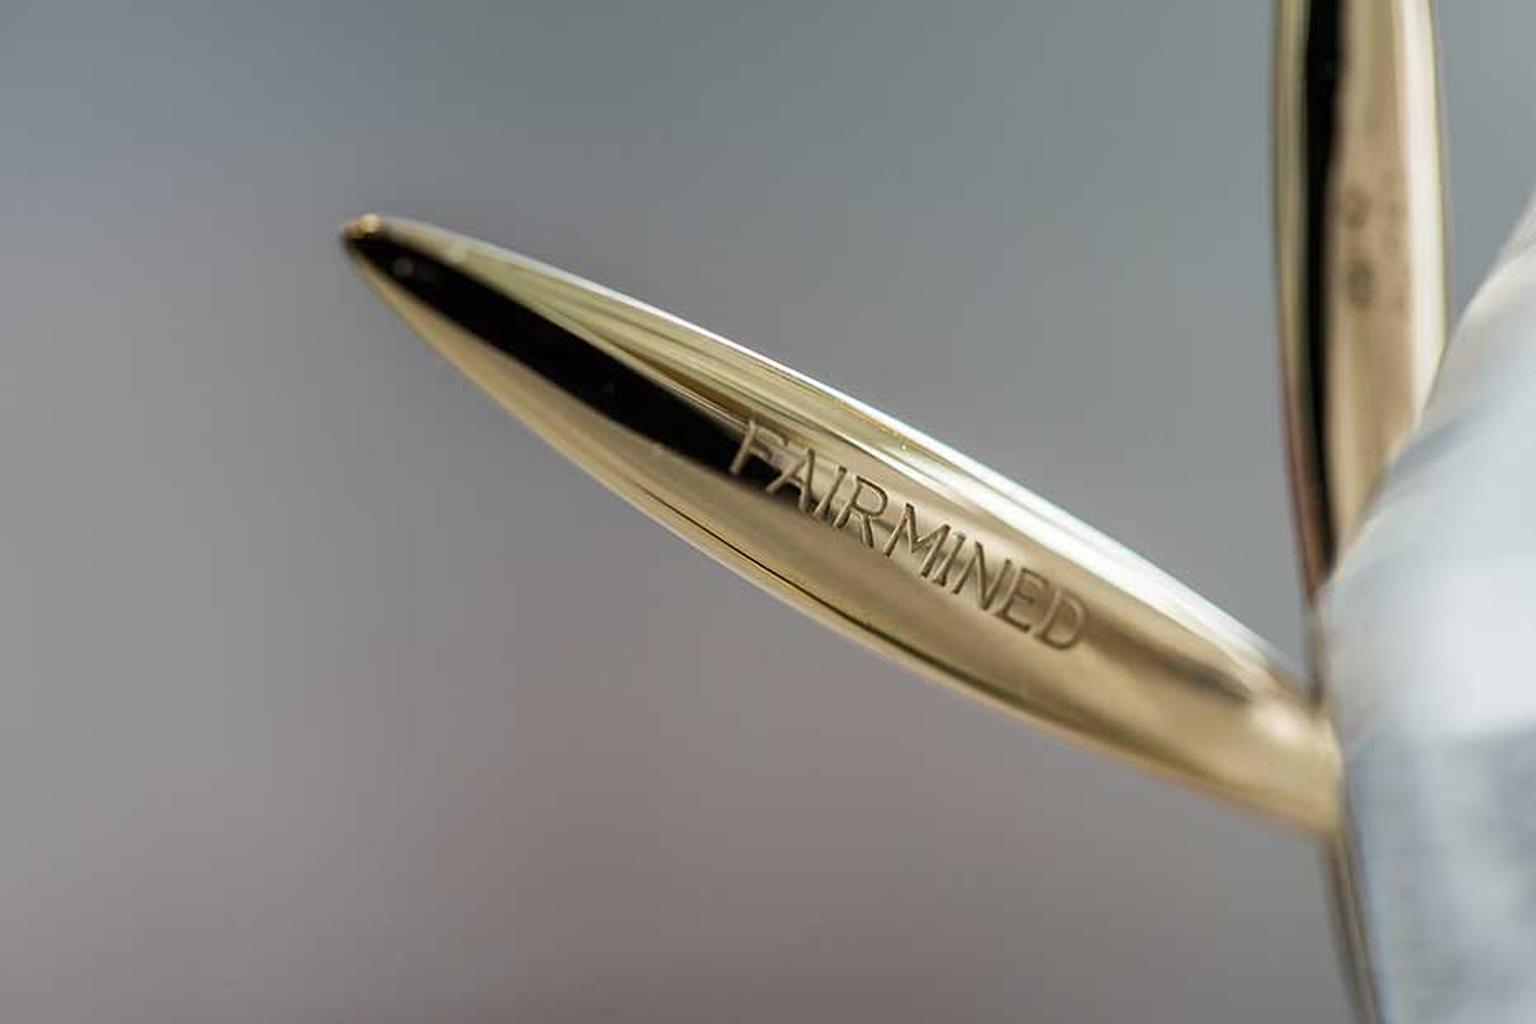 On the reverse of one of the feathery palm leaves that decorate the 2014 Palme d'Or award, Fairmined is stamped in capital letters in recognition of Chopard's commitment to sustainable luxury.